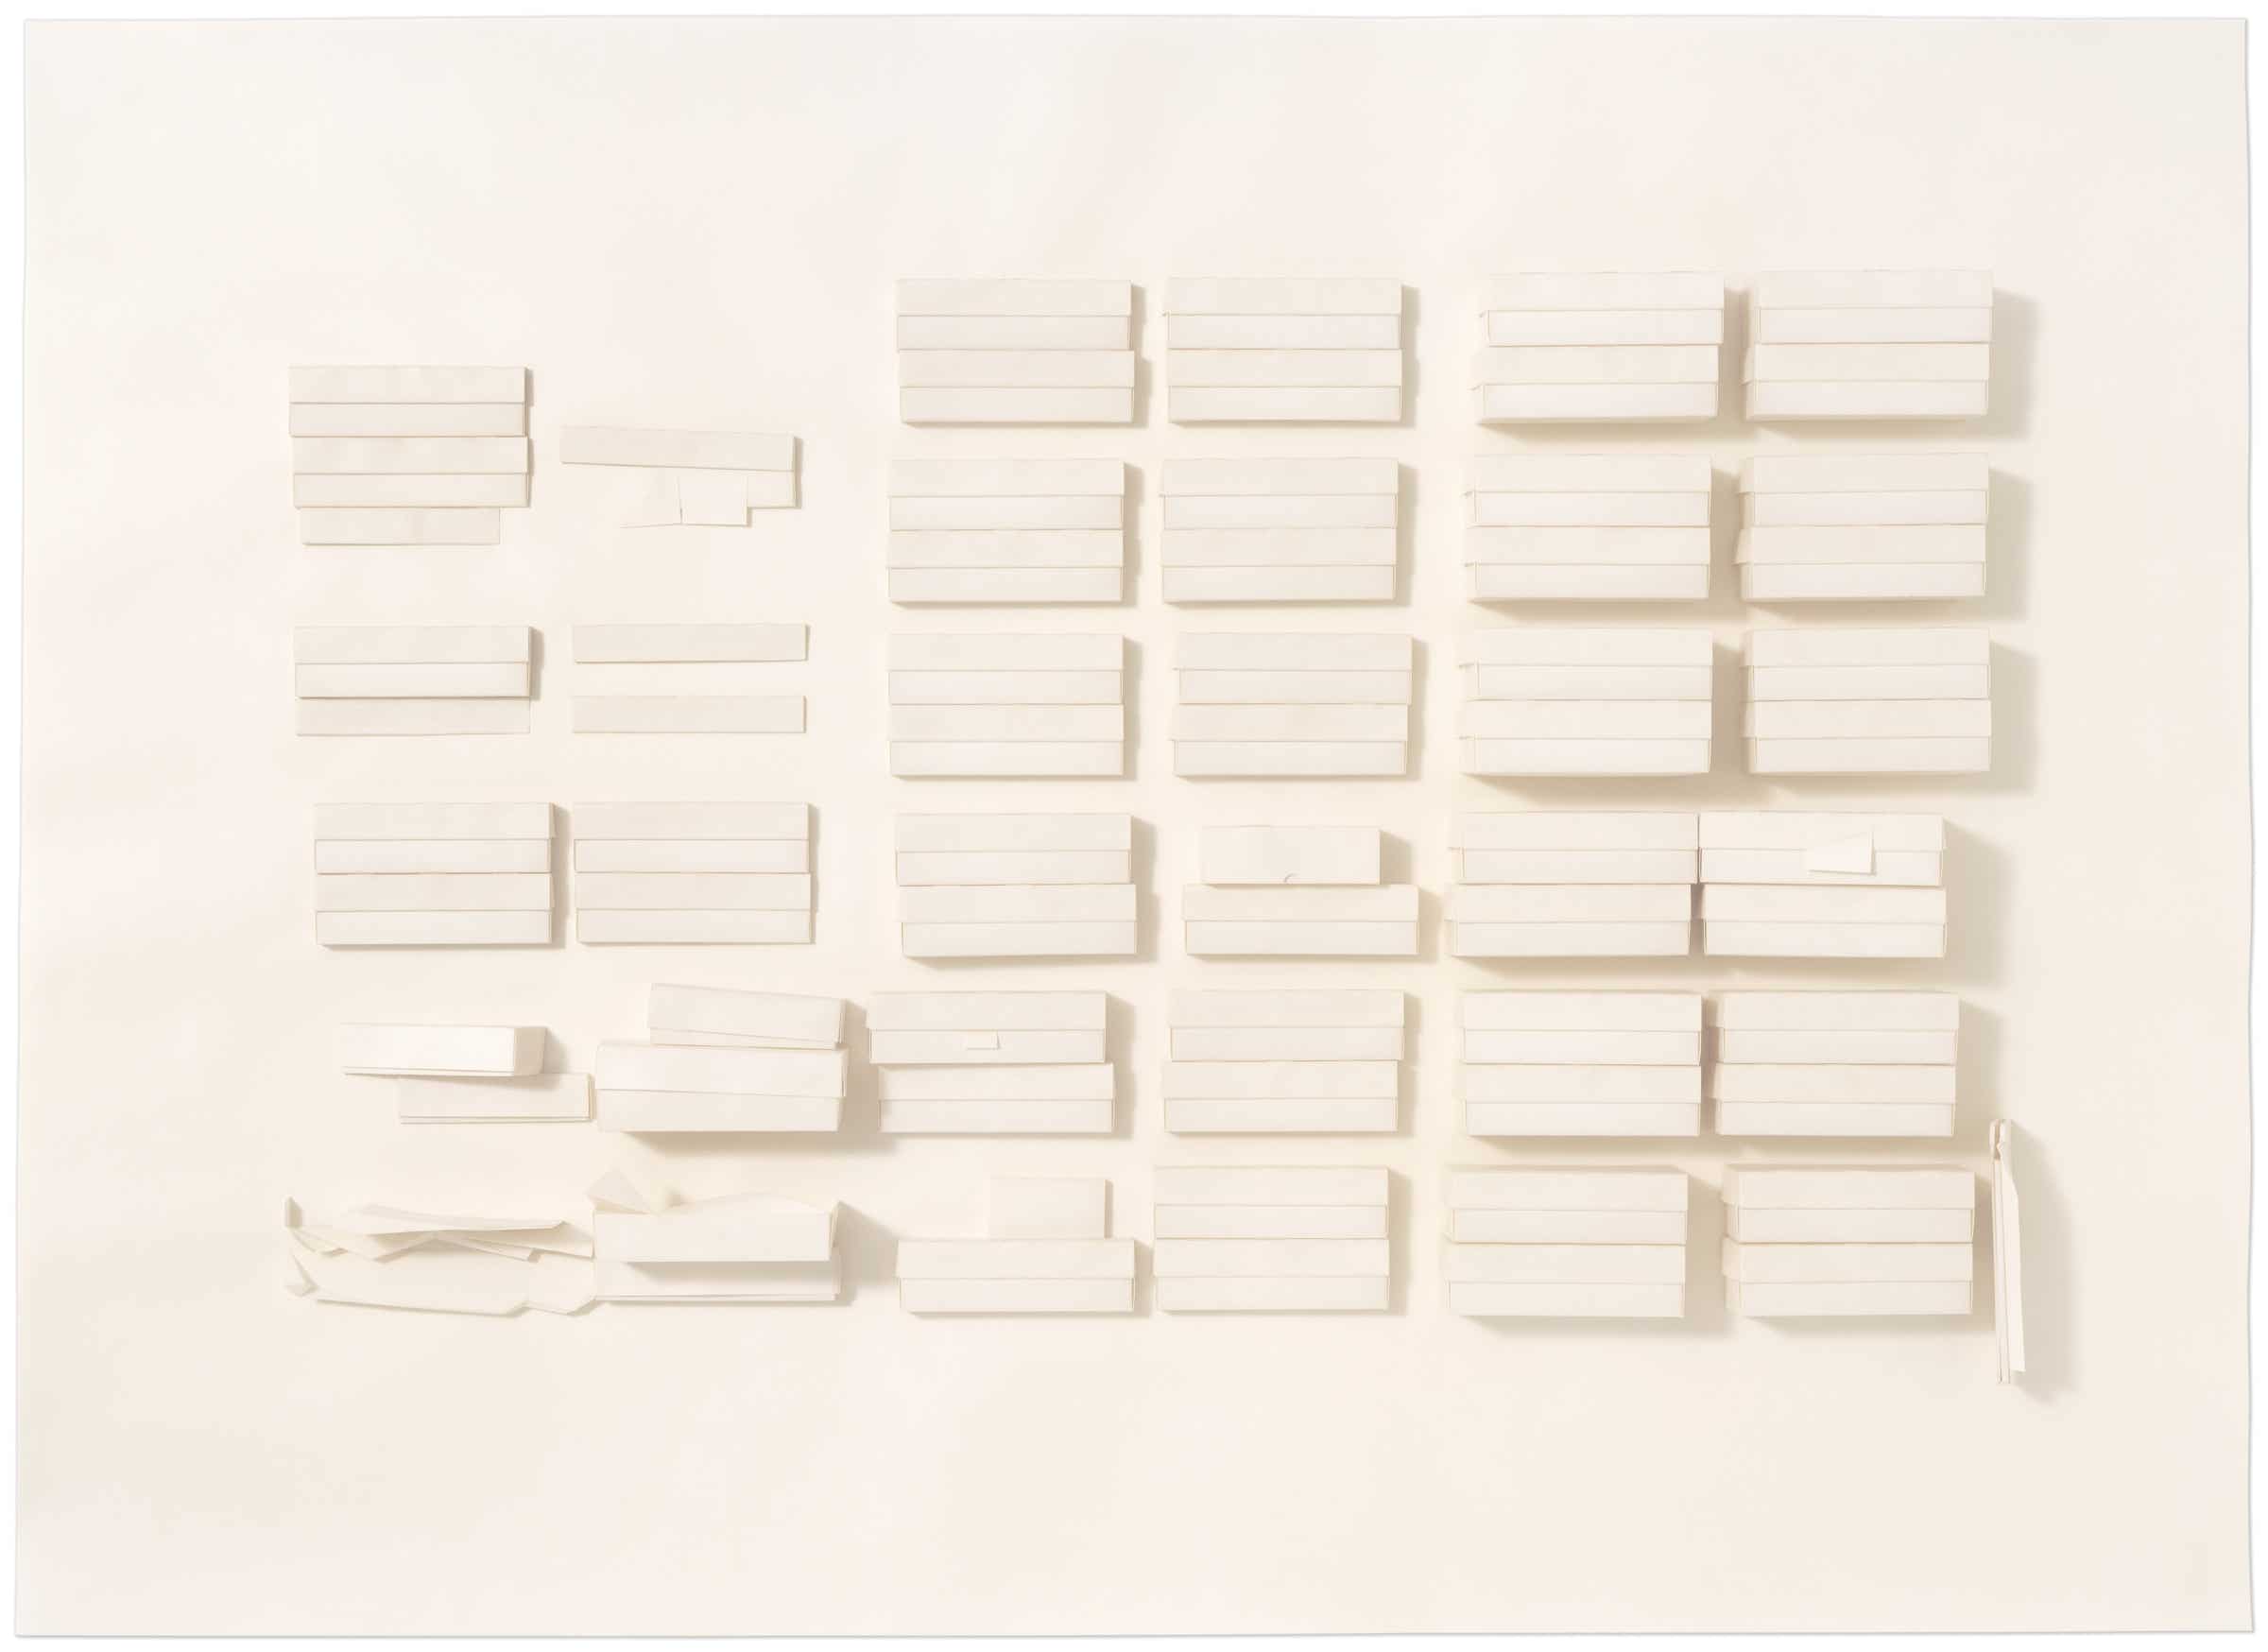 Paper object of the series »Depot« [Storage] by Herbert Stattler.